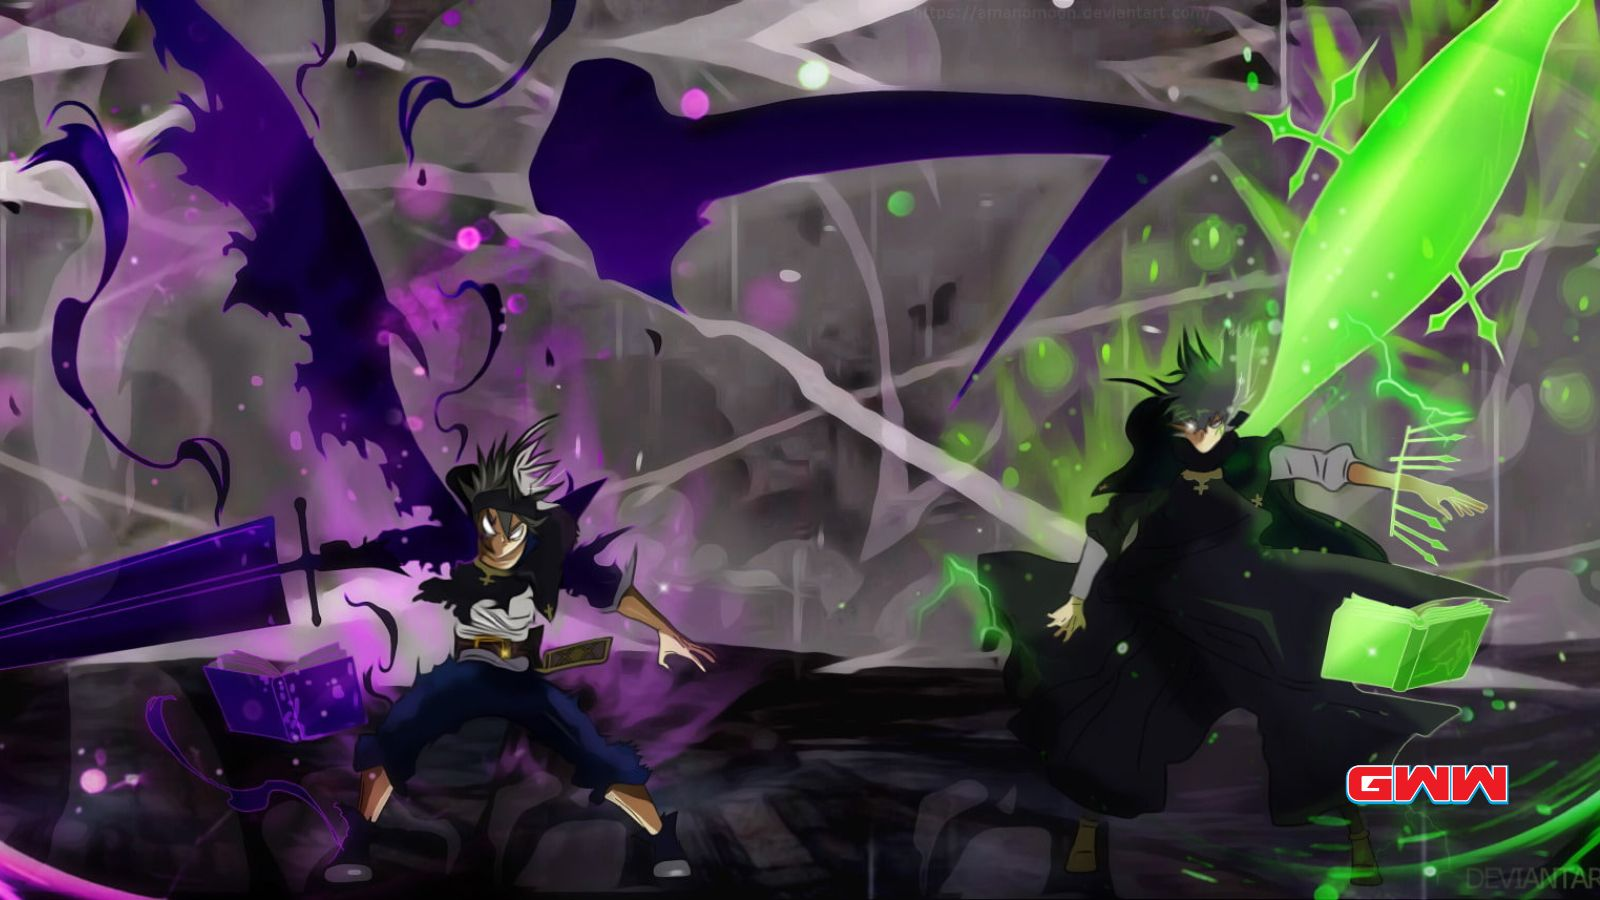 Asta and Yuno using their special powers awakening by Wallpaper Flare